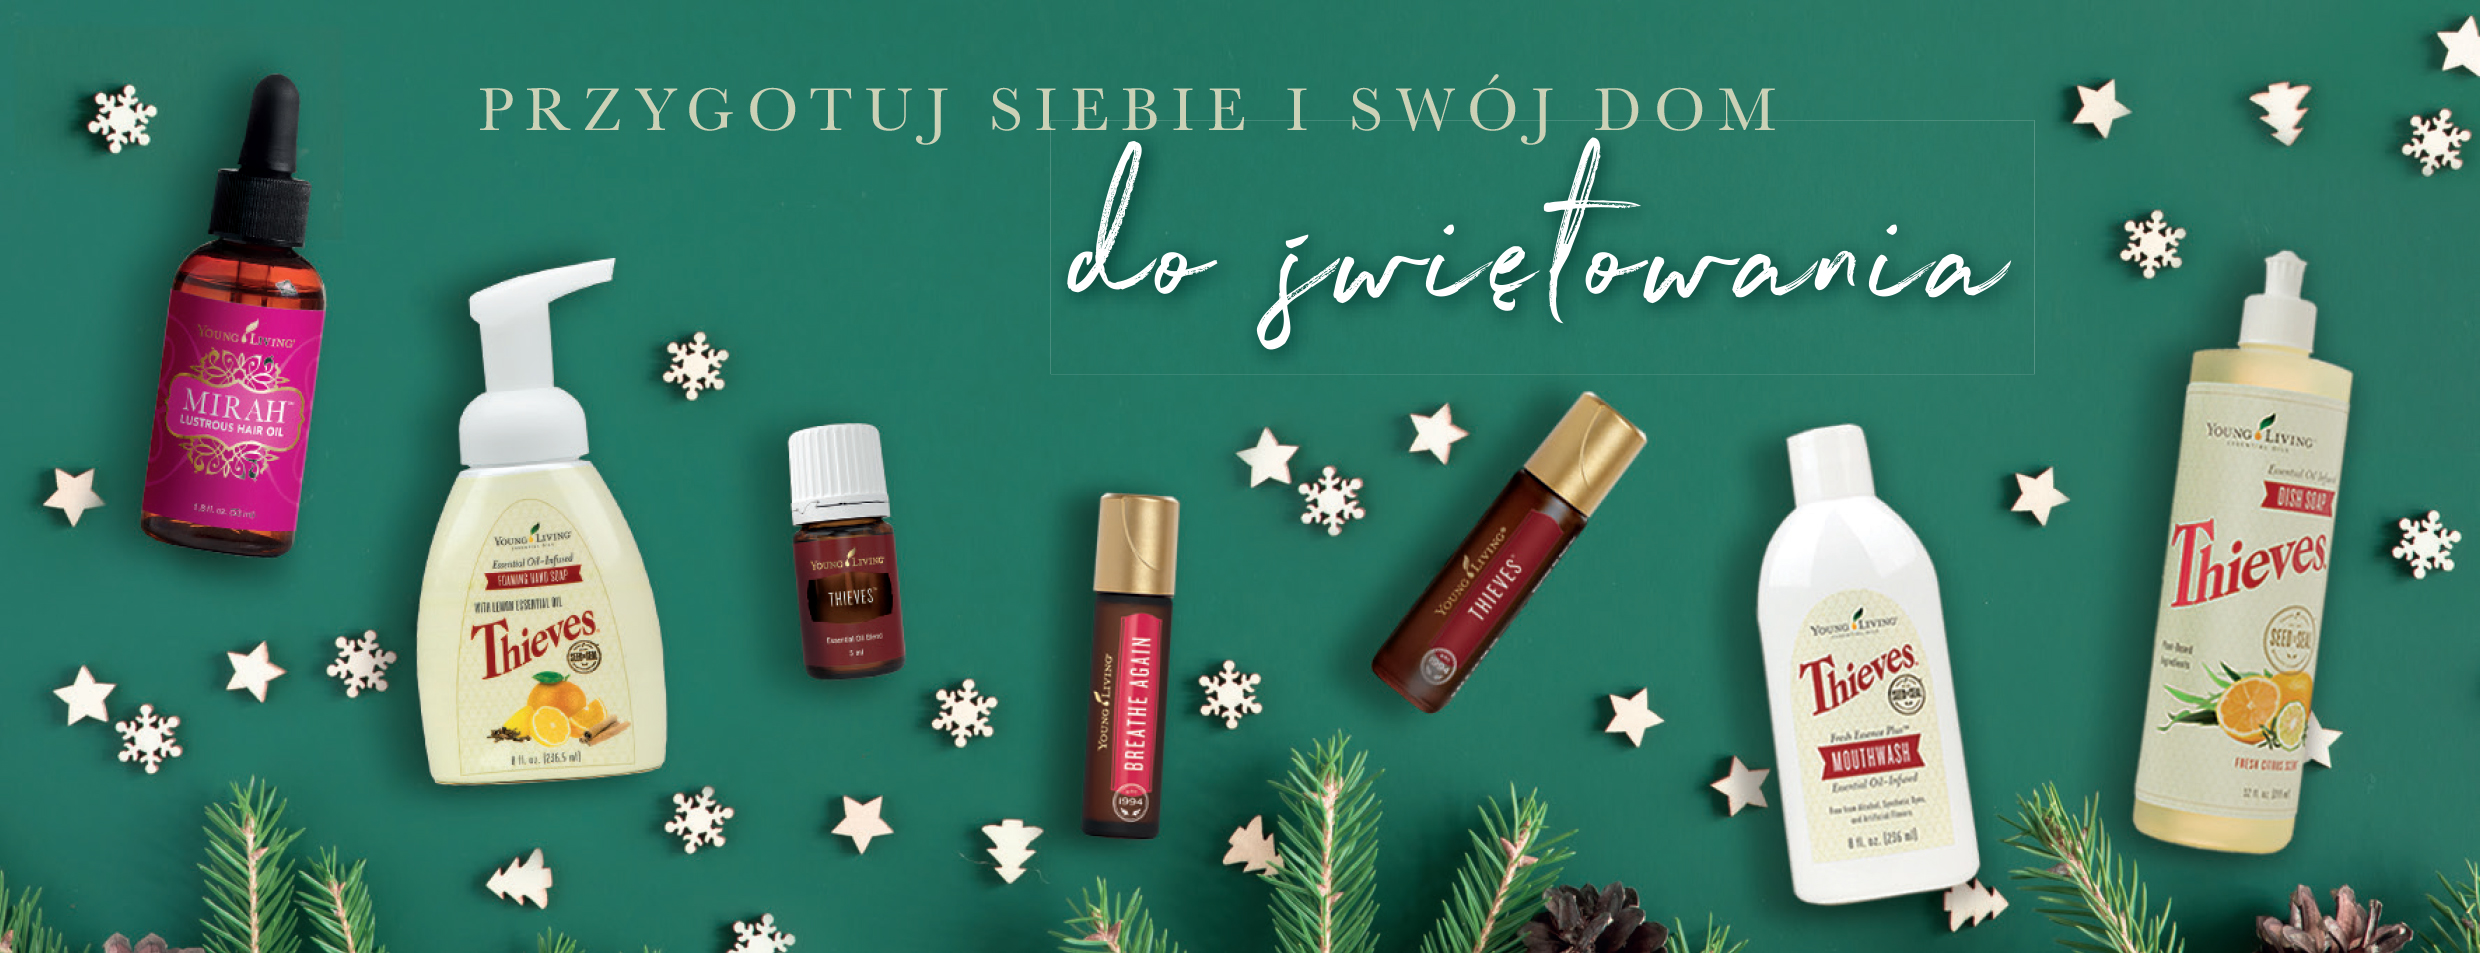 Young living promocja listopad 2019